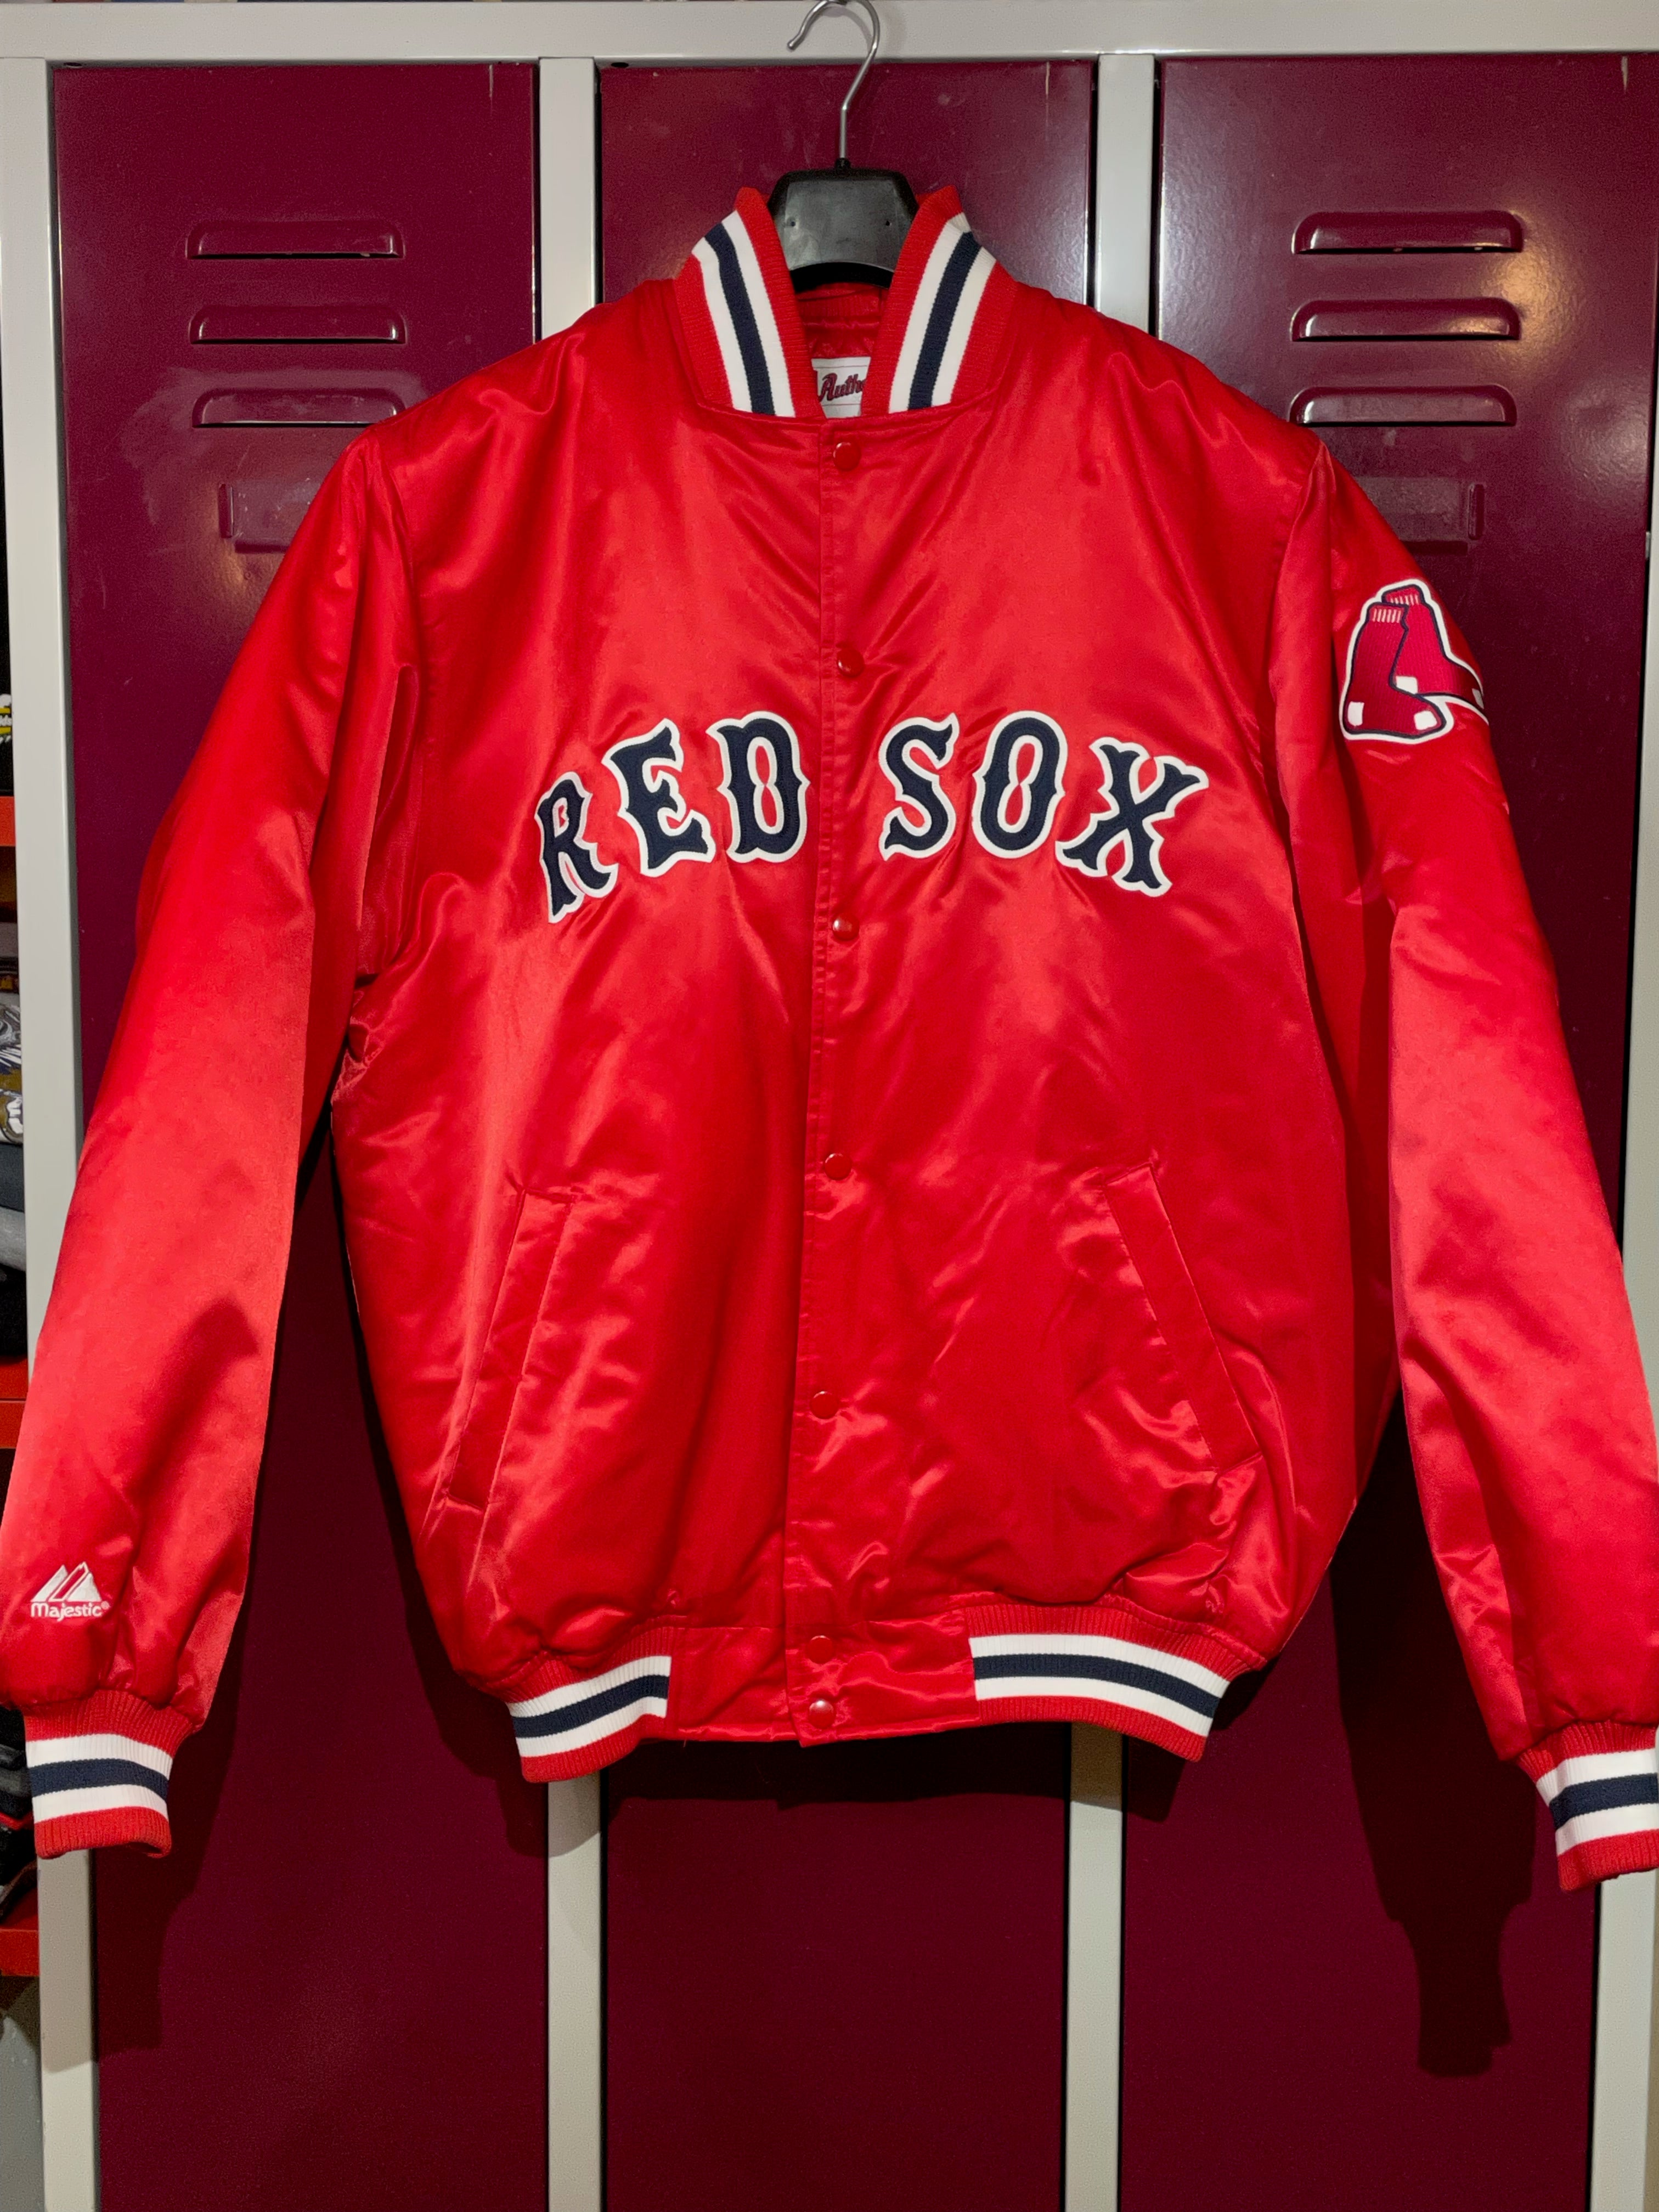 Majestic Red Sox Jacket